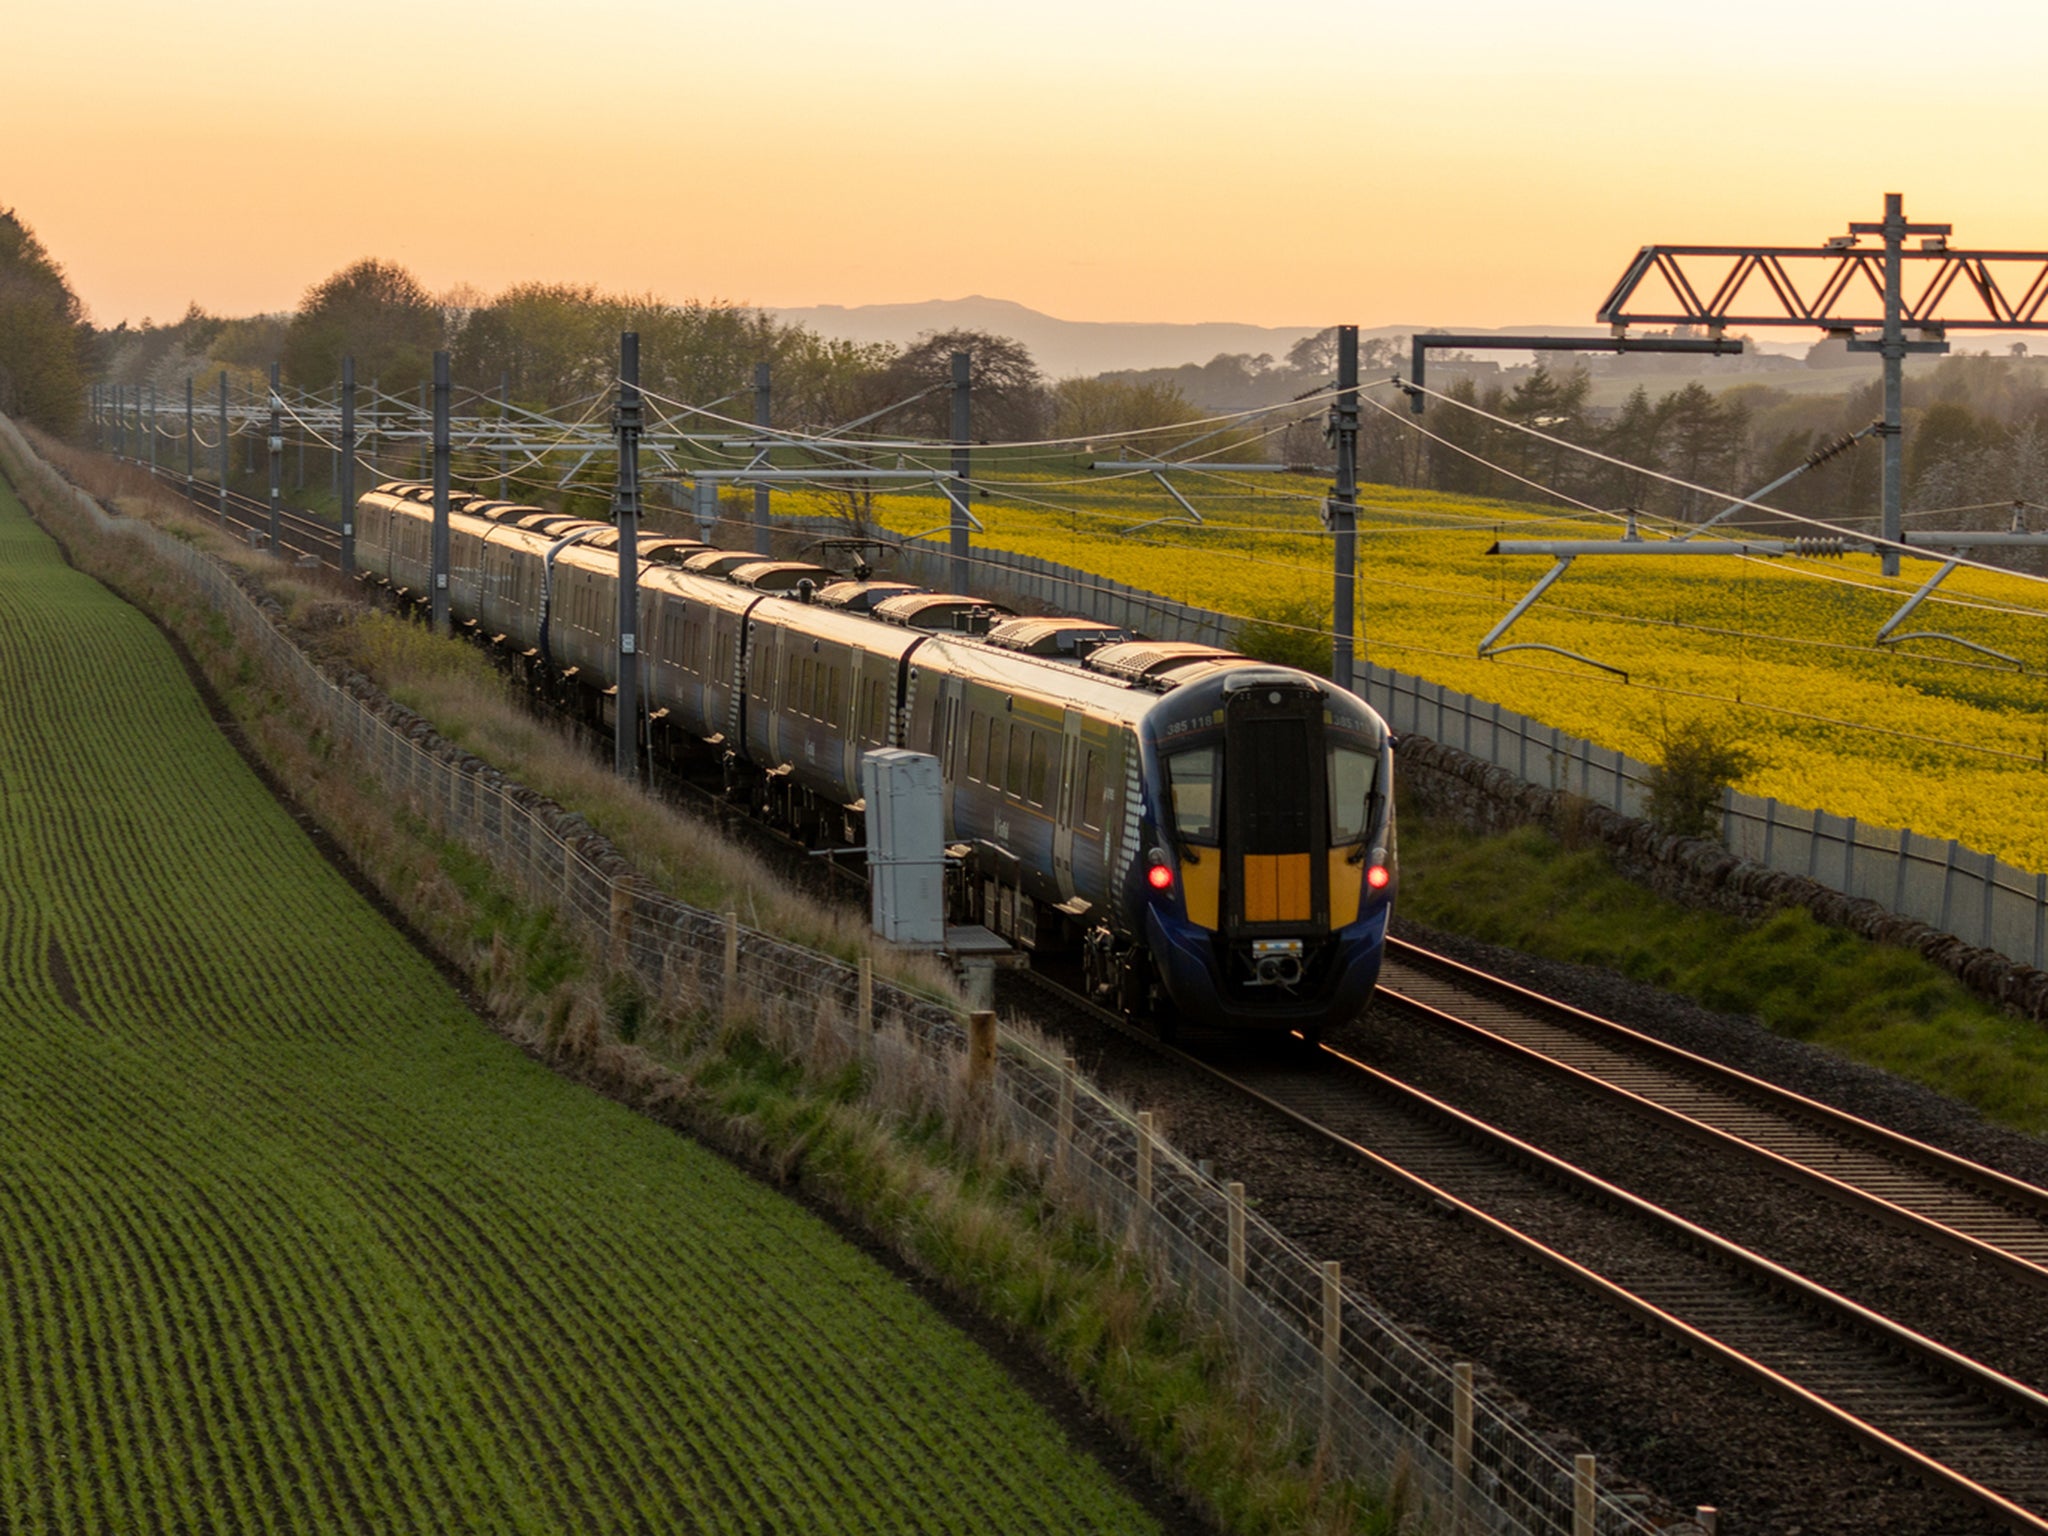 The route from Ayrshire to Liverpool involves three train operators including ScotRail